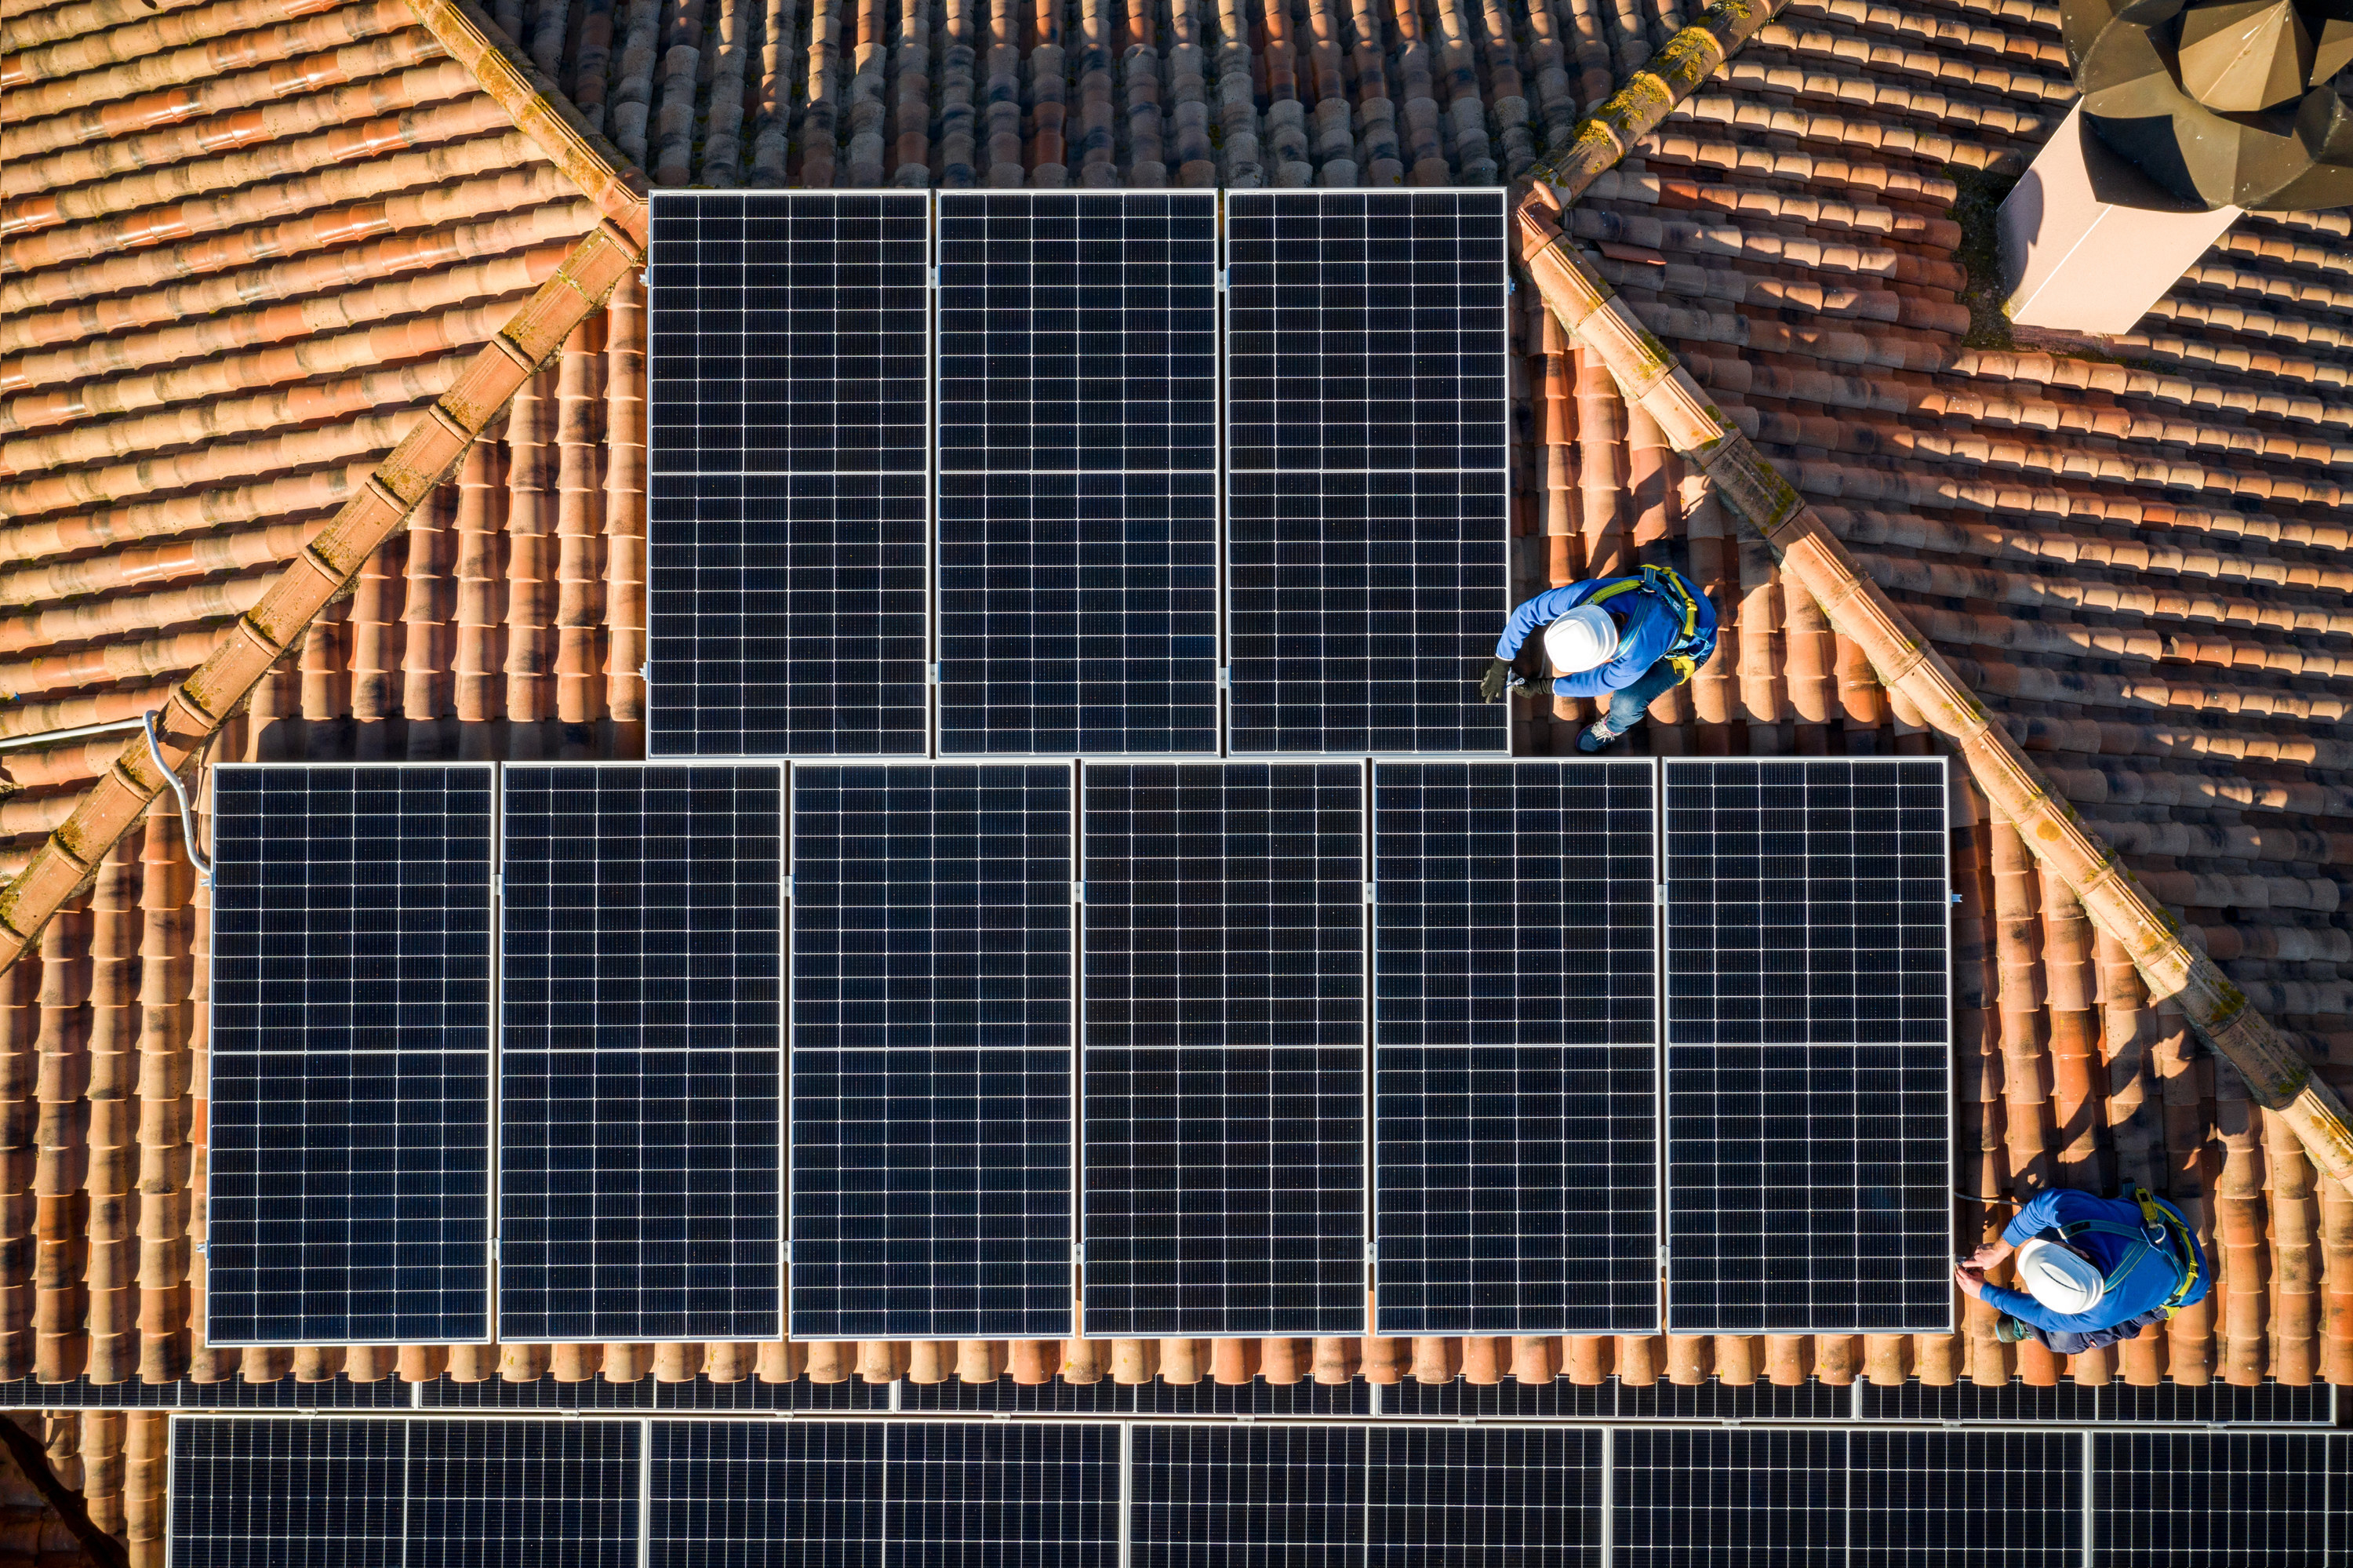 Workers installing solar panels on a rooftop